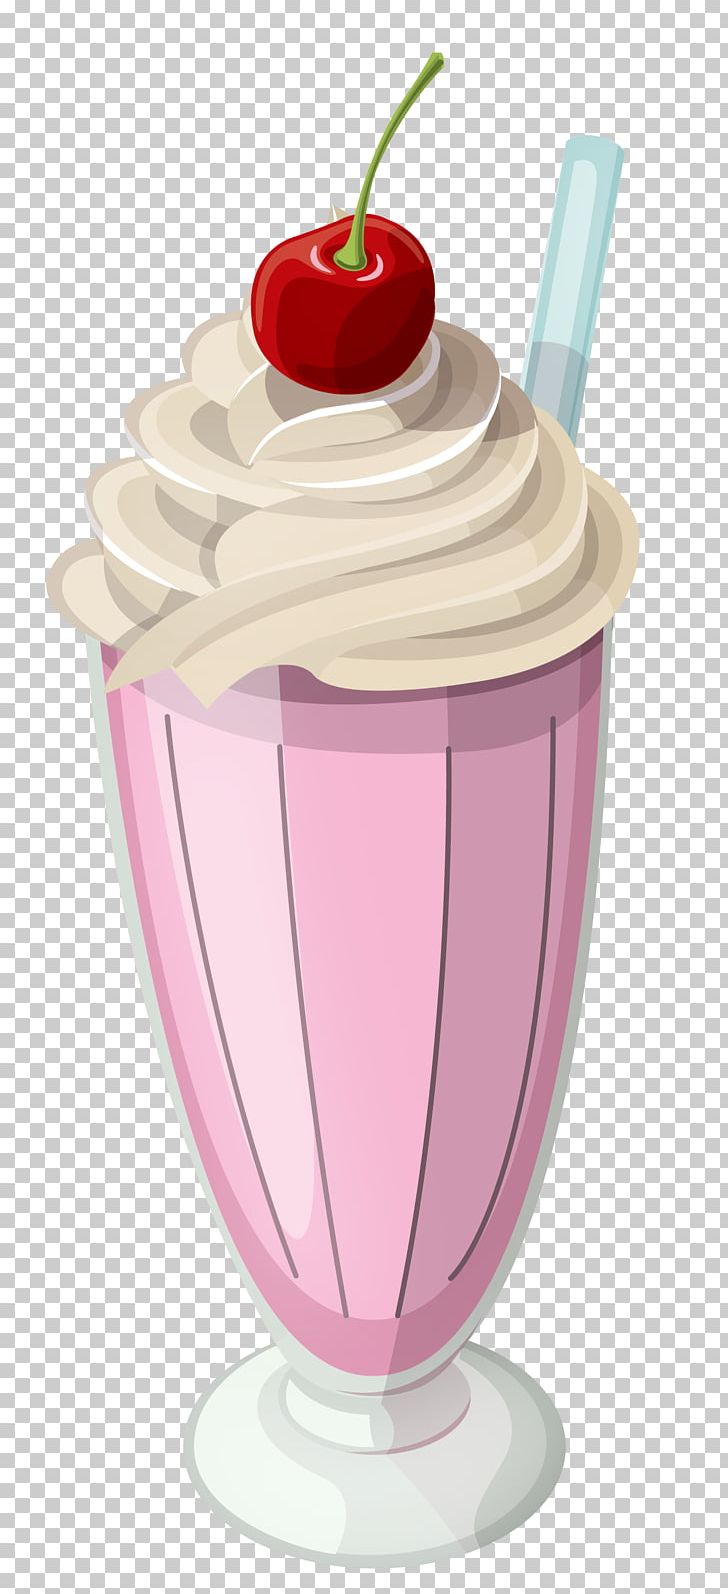 Milkshake Ice Cream Smoothie PNG, Clipart, Cherry, Chocolate, Clip, Cream, Cup Free PNG Download